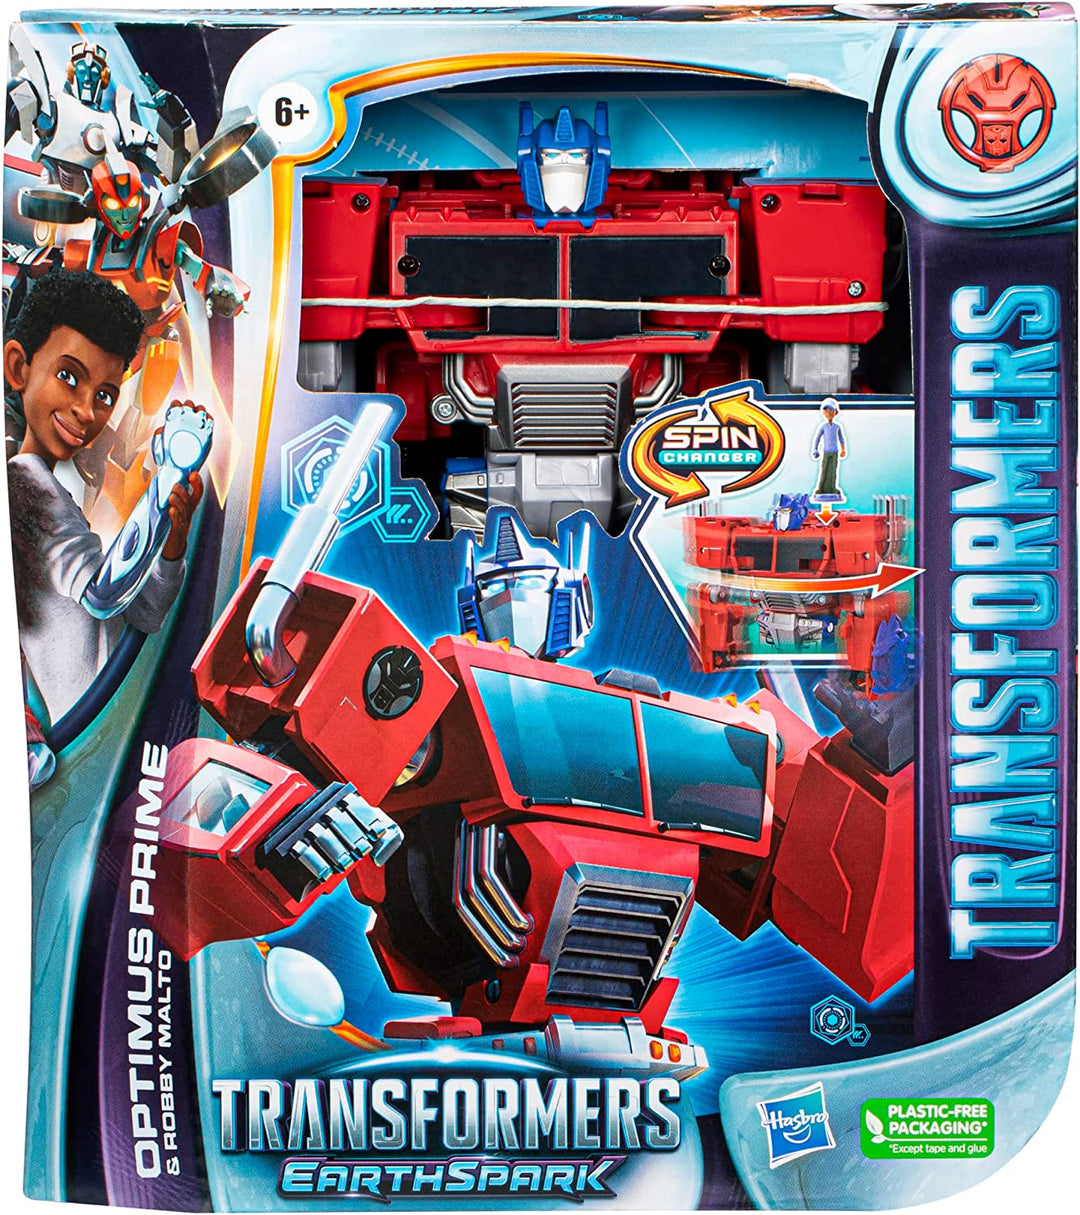 Transformers EarthSpark Spin Changer Optimus Prime & Robby Malto Action Figures